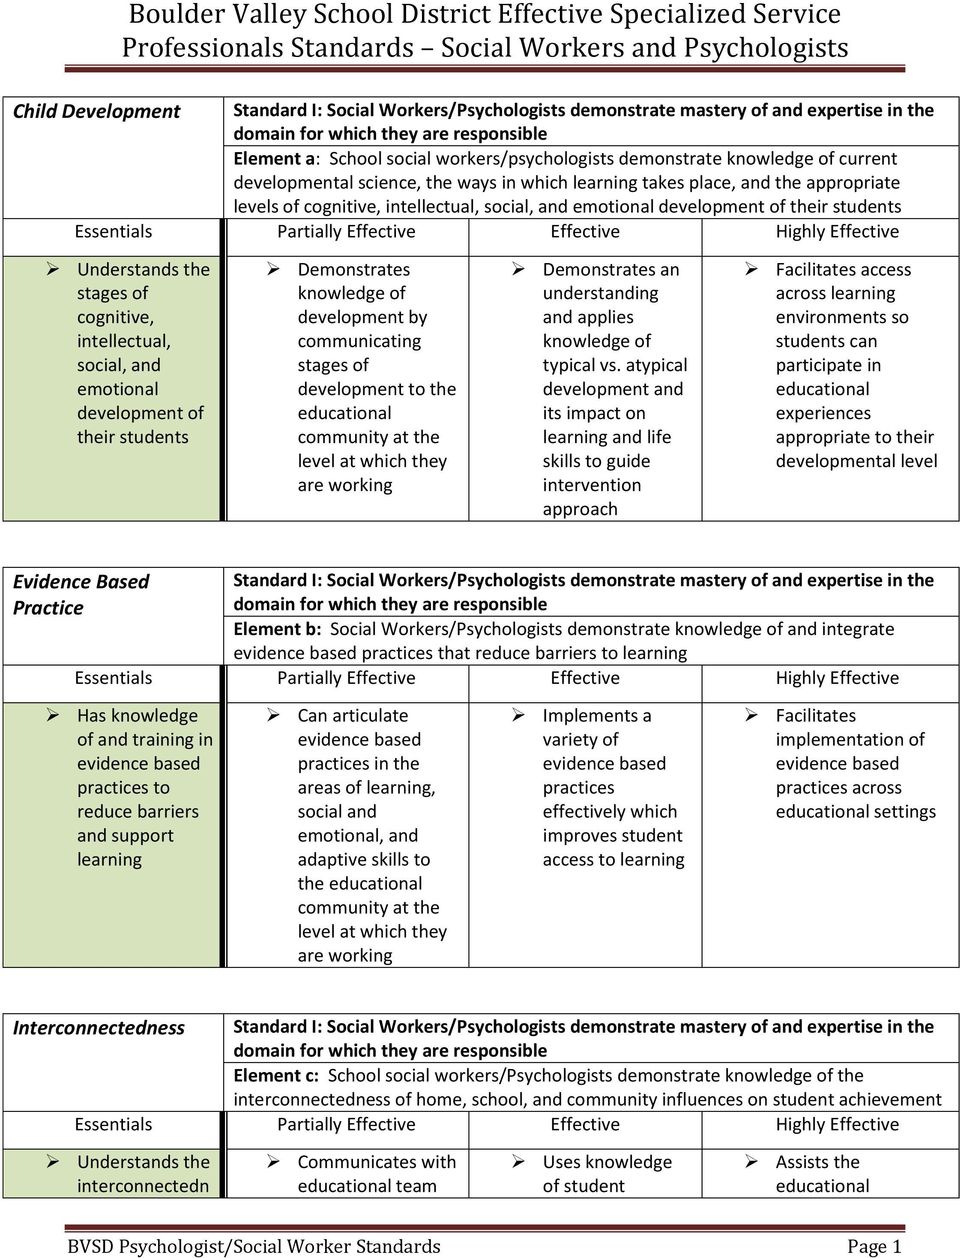 intellectual, social, and emotional development of Demonstrates knowledge of development by communicating stages of development to the educational at the level at which they are working Demonstrates